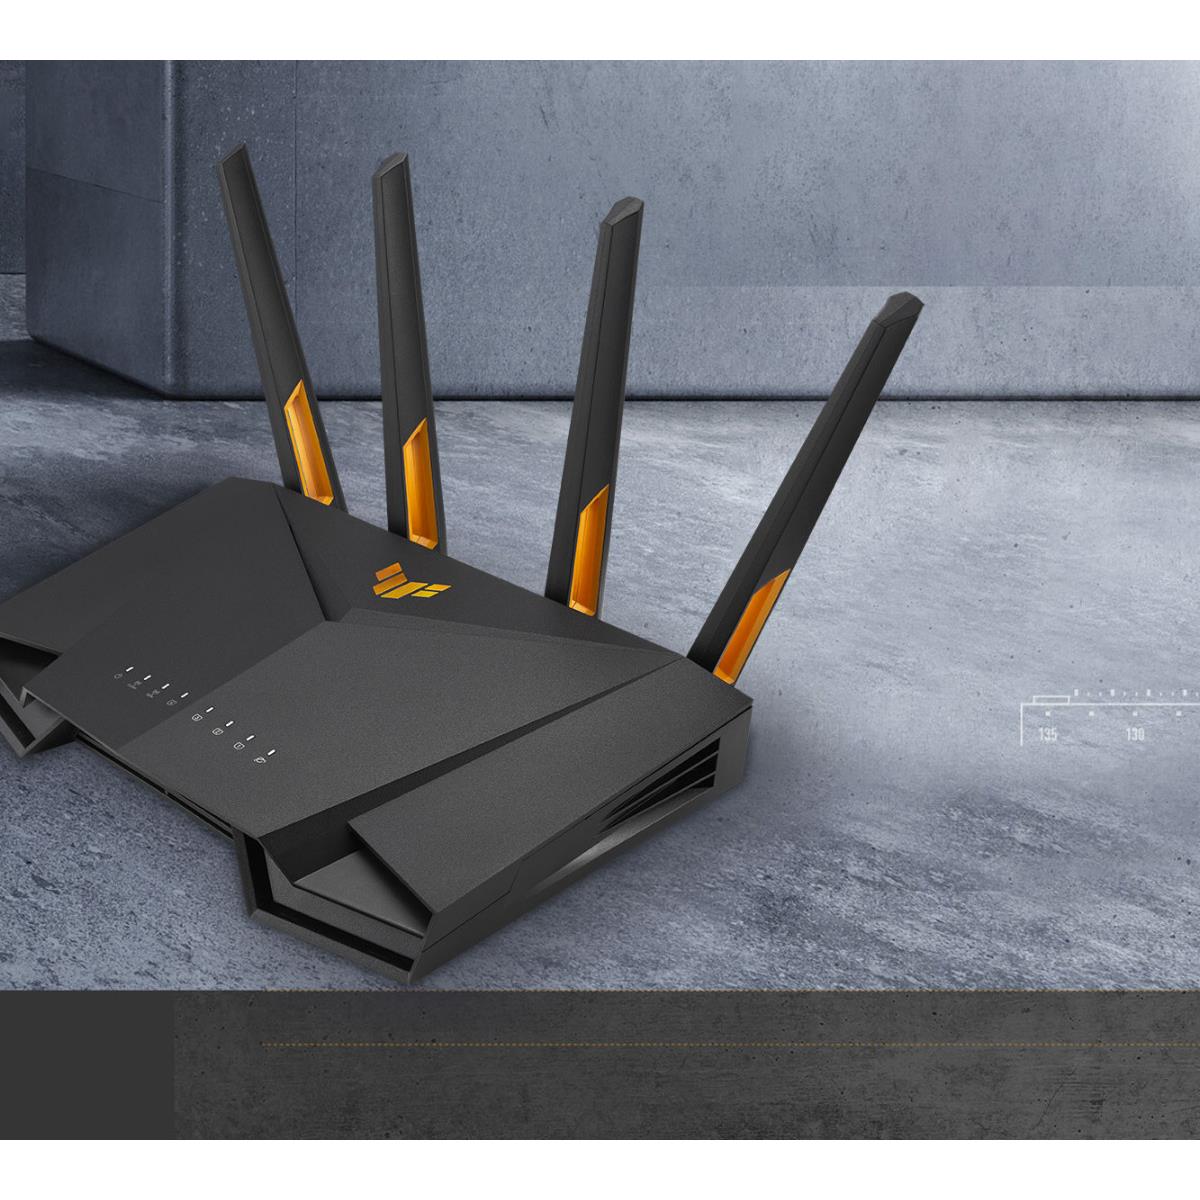 ASUS TUF Gaming AX3000 V2 Wi-Fi 6 Router Is Bursting With